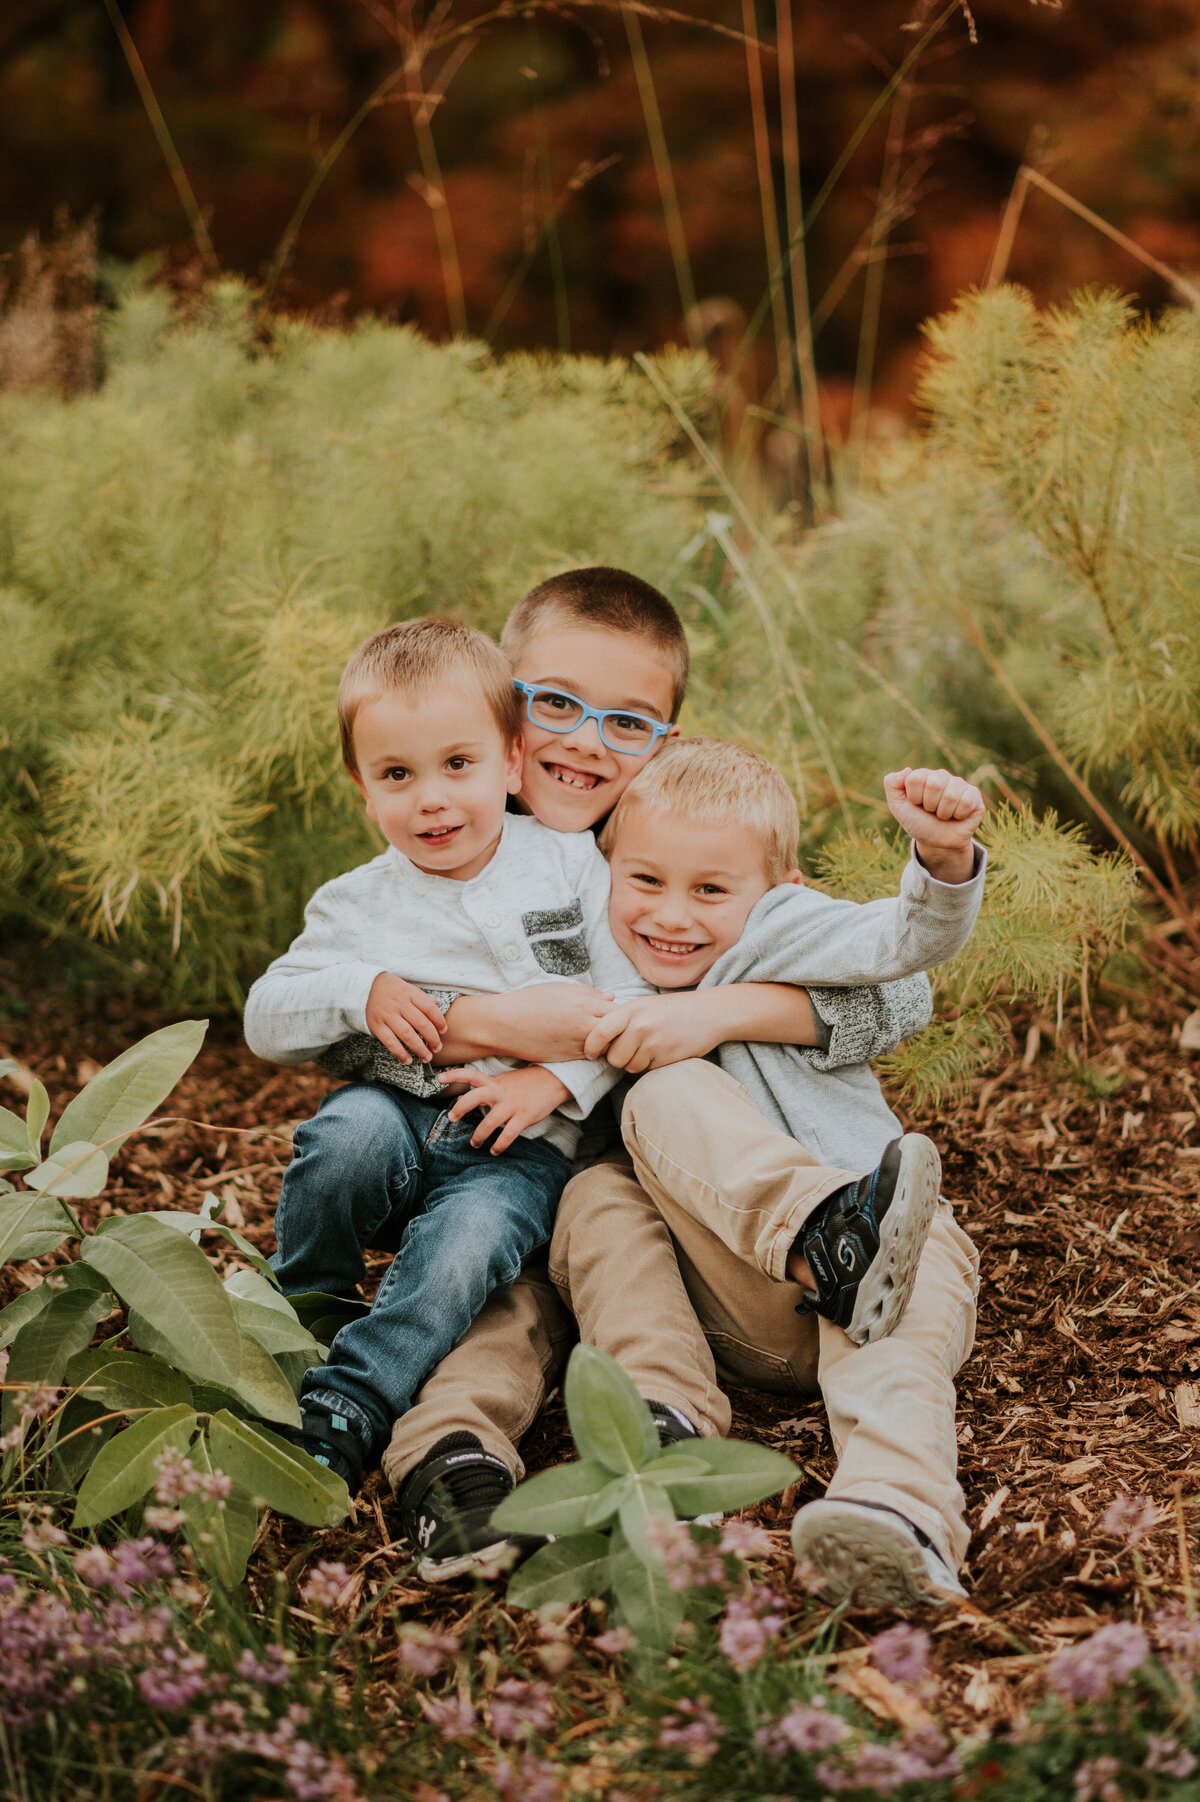 Experience park playfulness in St. Paul family portraits by Shannon Kathleen Photography. Your family's laughter becomes art. Book your session today!